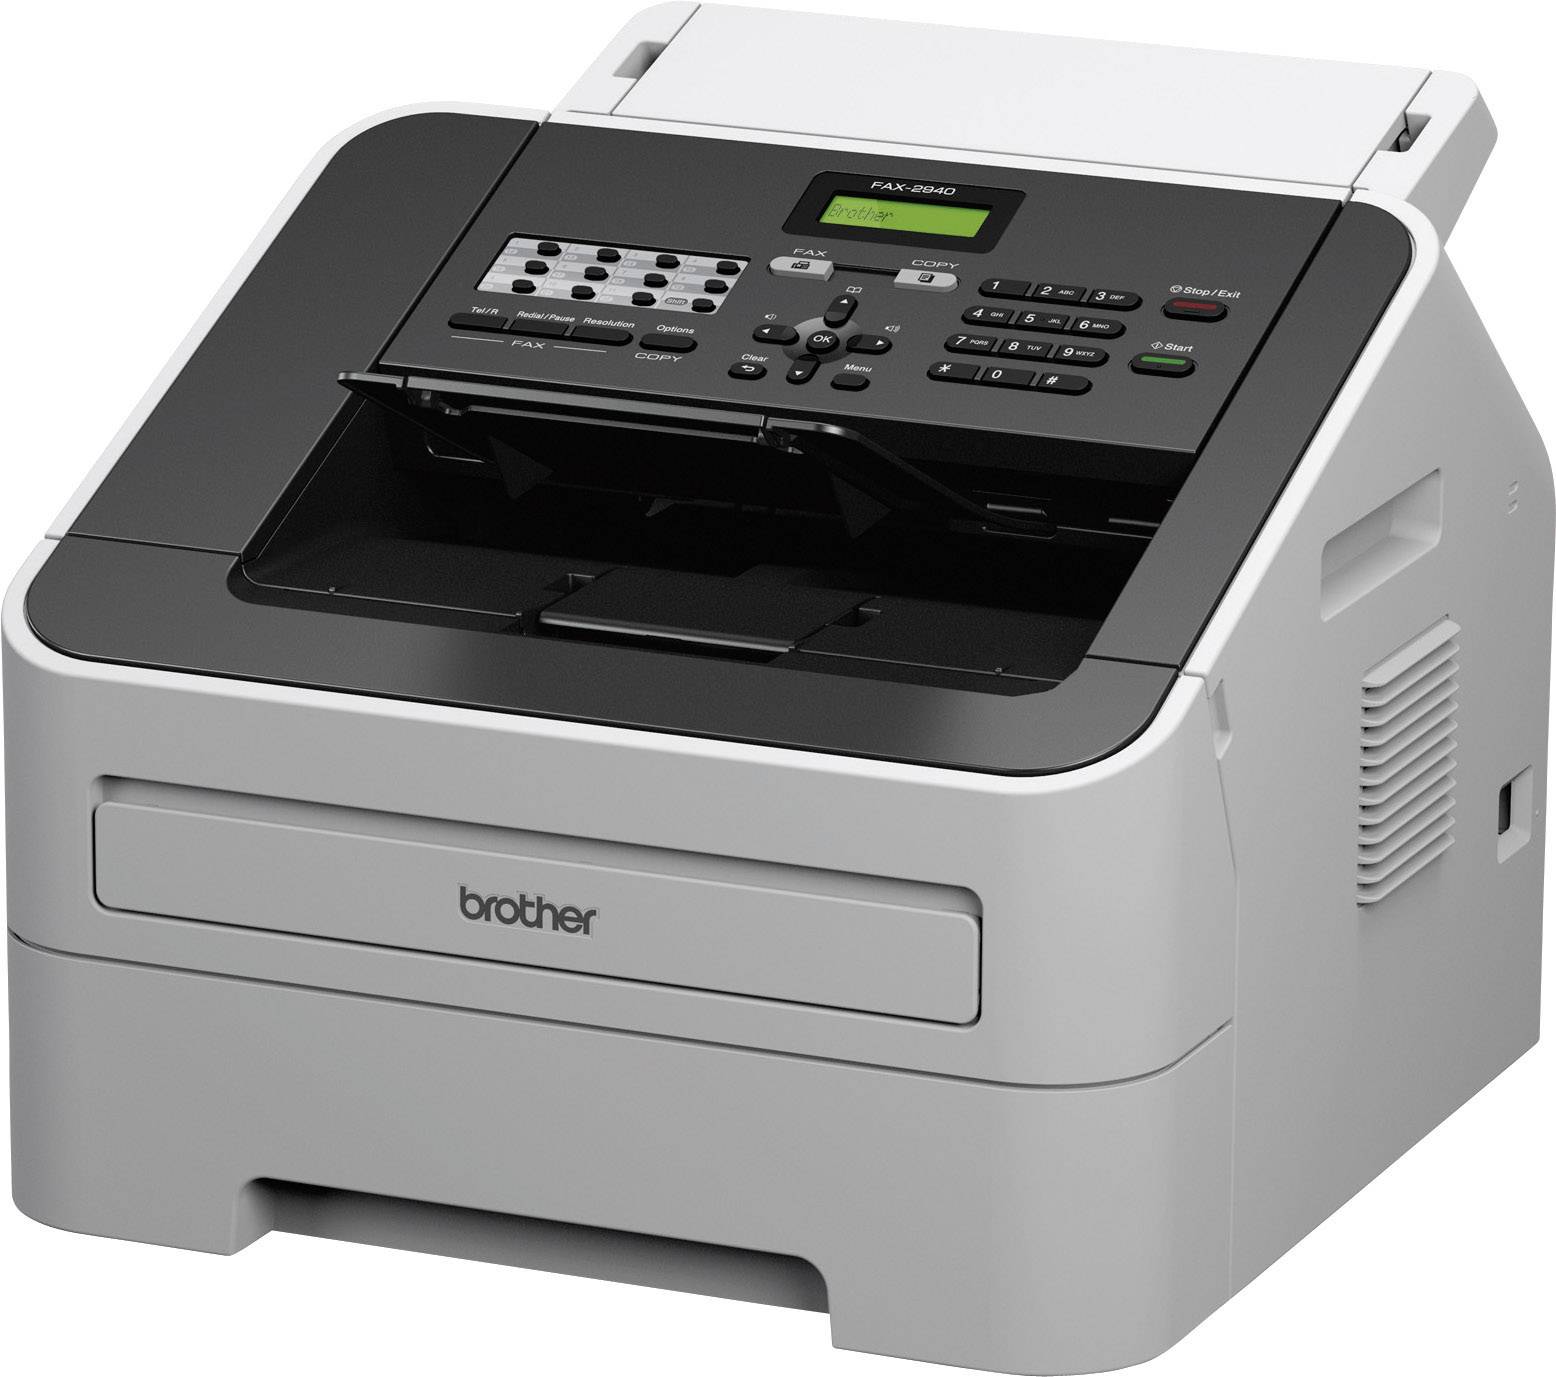 Brother FAX-29, laser fax machine (29 Sides page memory, 29 sheet  page/document feed, modem speed)